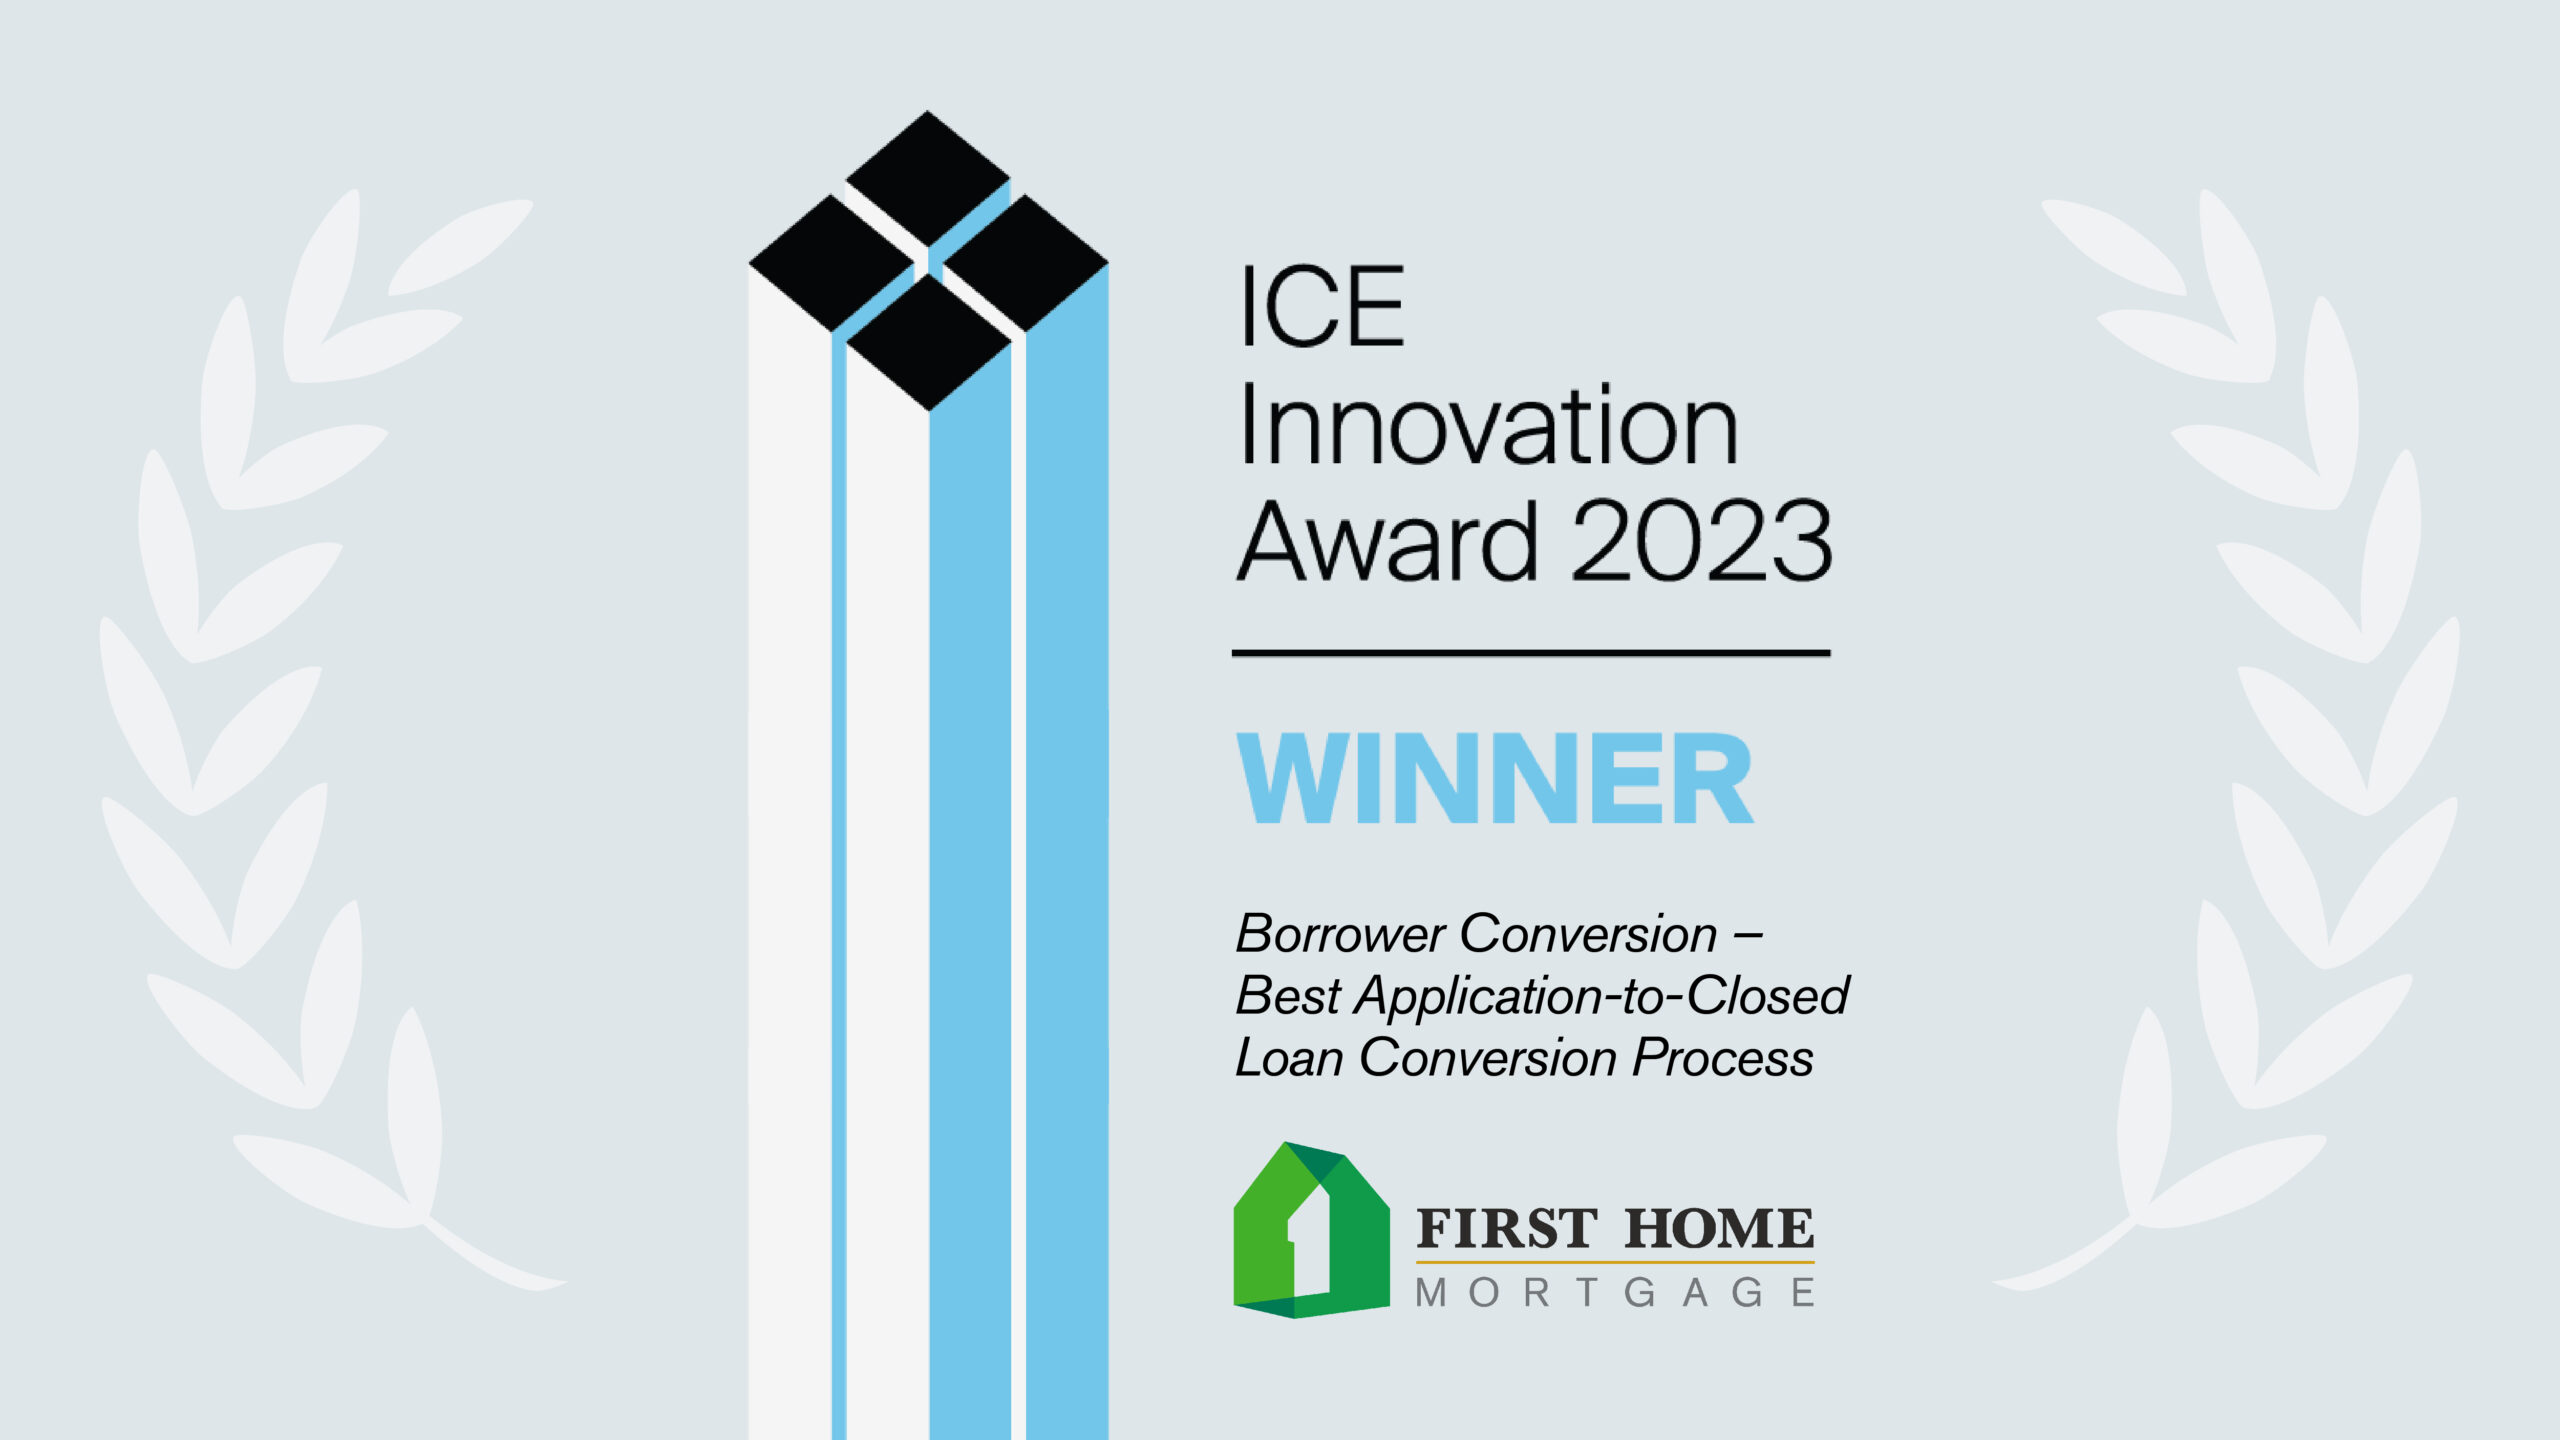 First Home Mortgage Wins 2023 ICE Innovation Award!